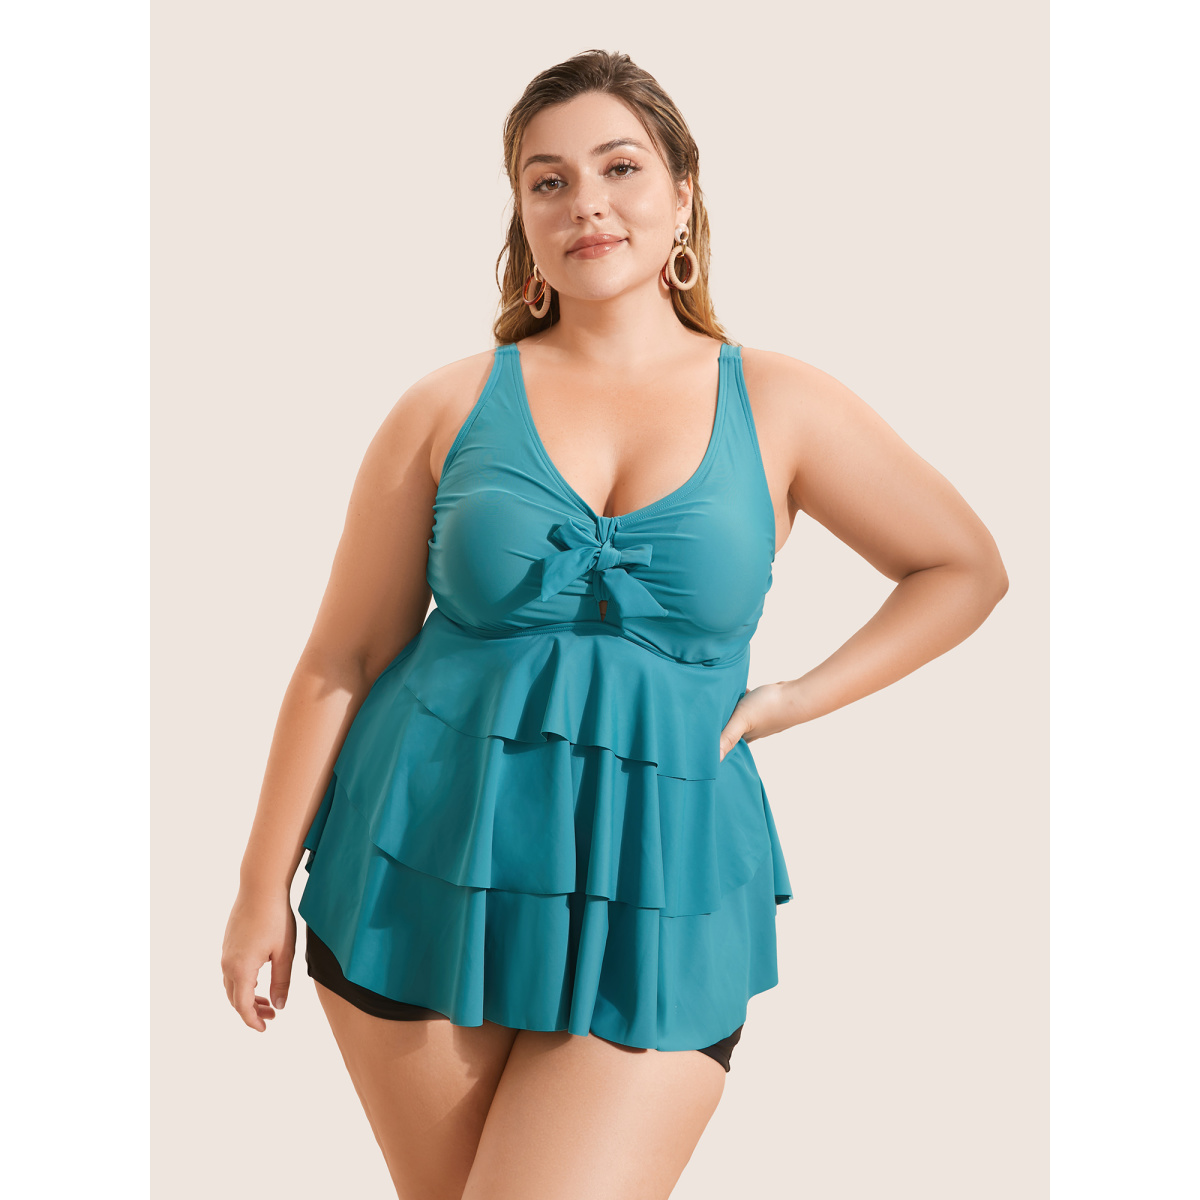 

Plus Size Knotted Front Ruffle Tiered Tankini Top Women's Swimwear Turquoise Beach Ruffles High stretch Bodycon V-neck Curve Swim Tops BloomChic